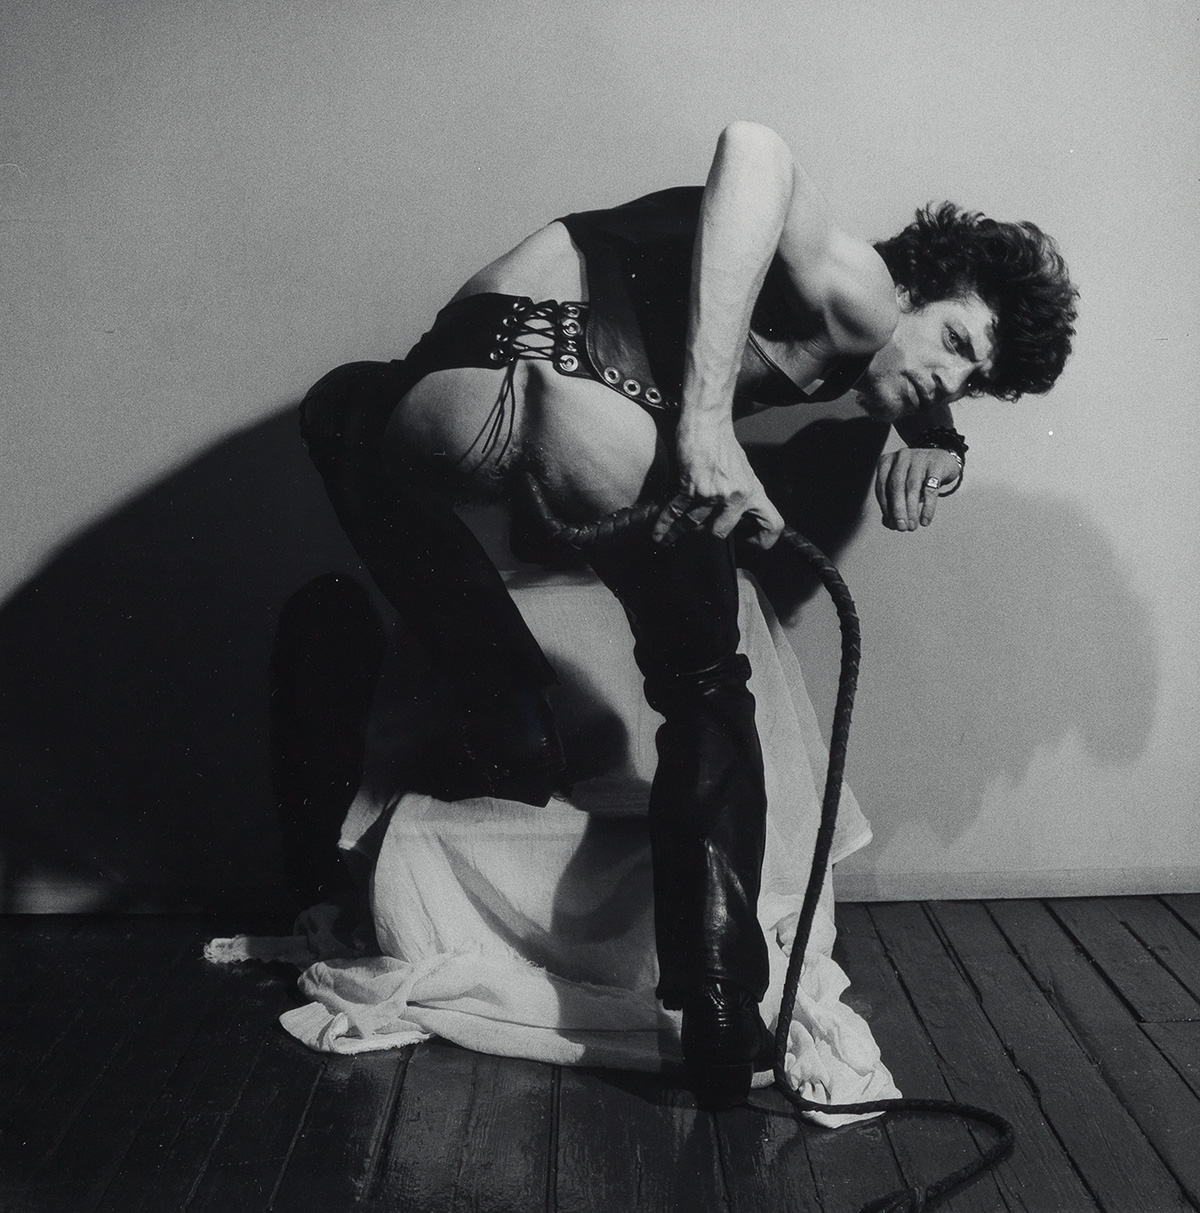 ROBERT MAPPLETHORPE (1946-1989) Self-Portrait with Whip, from the X Portfolio.